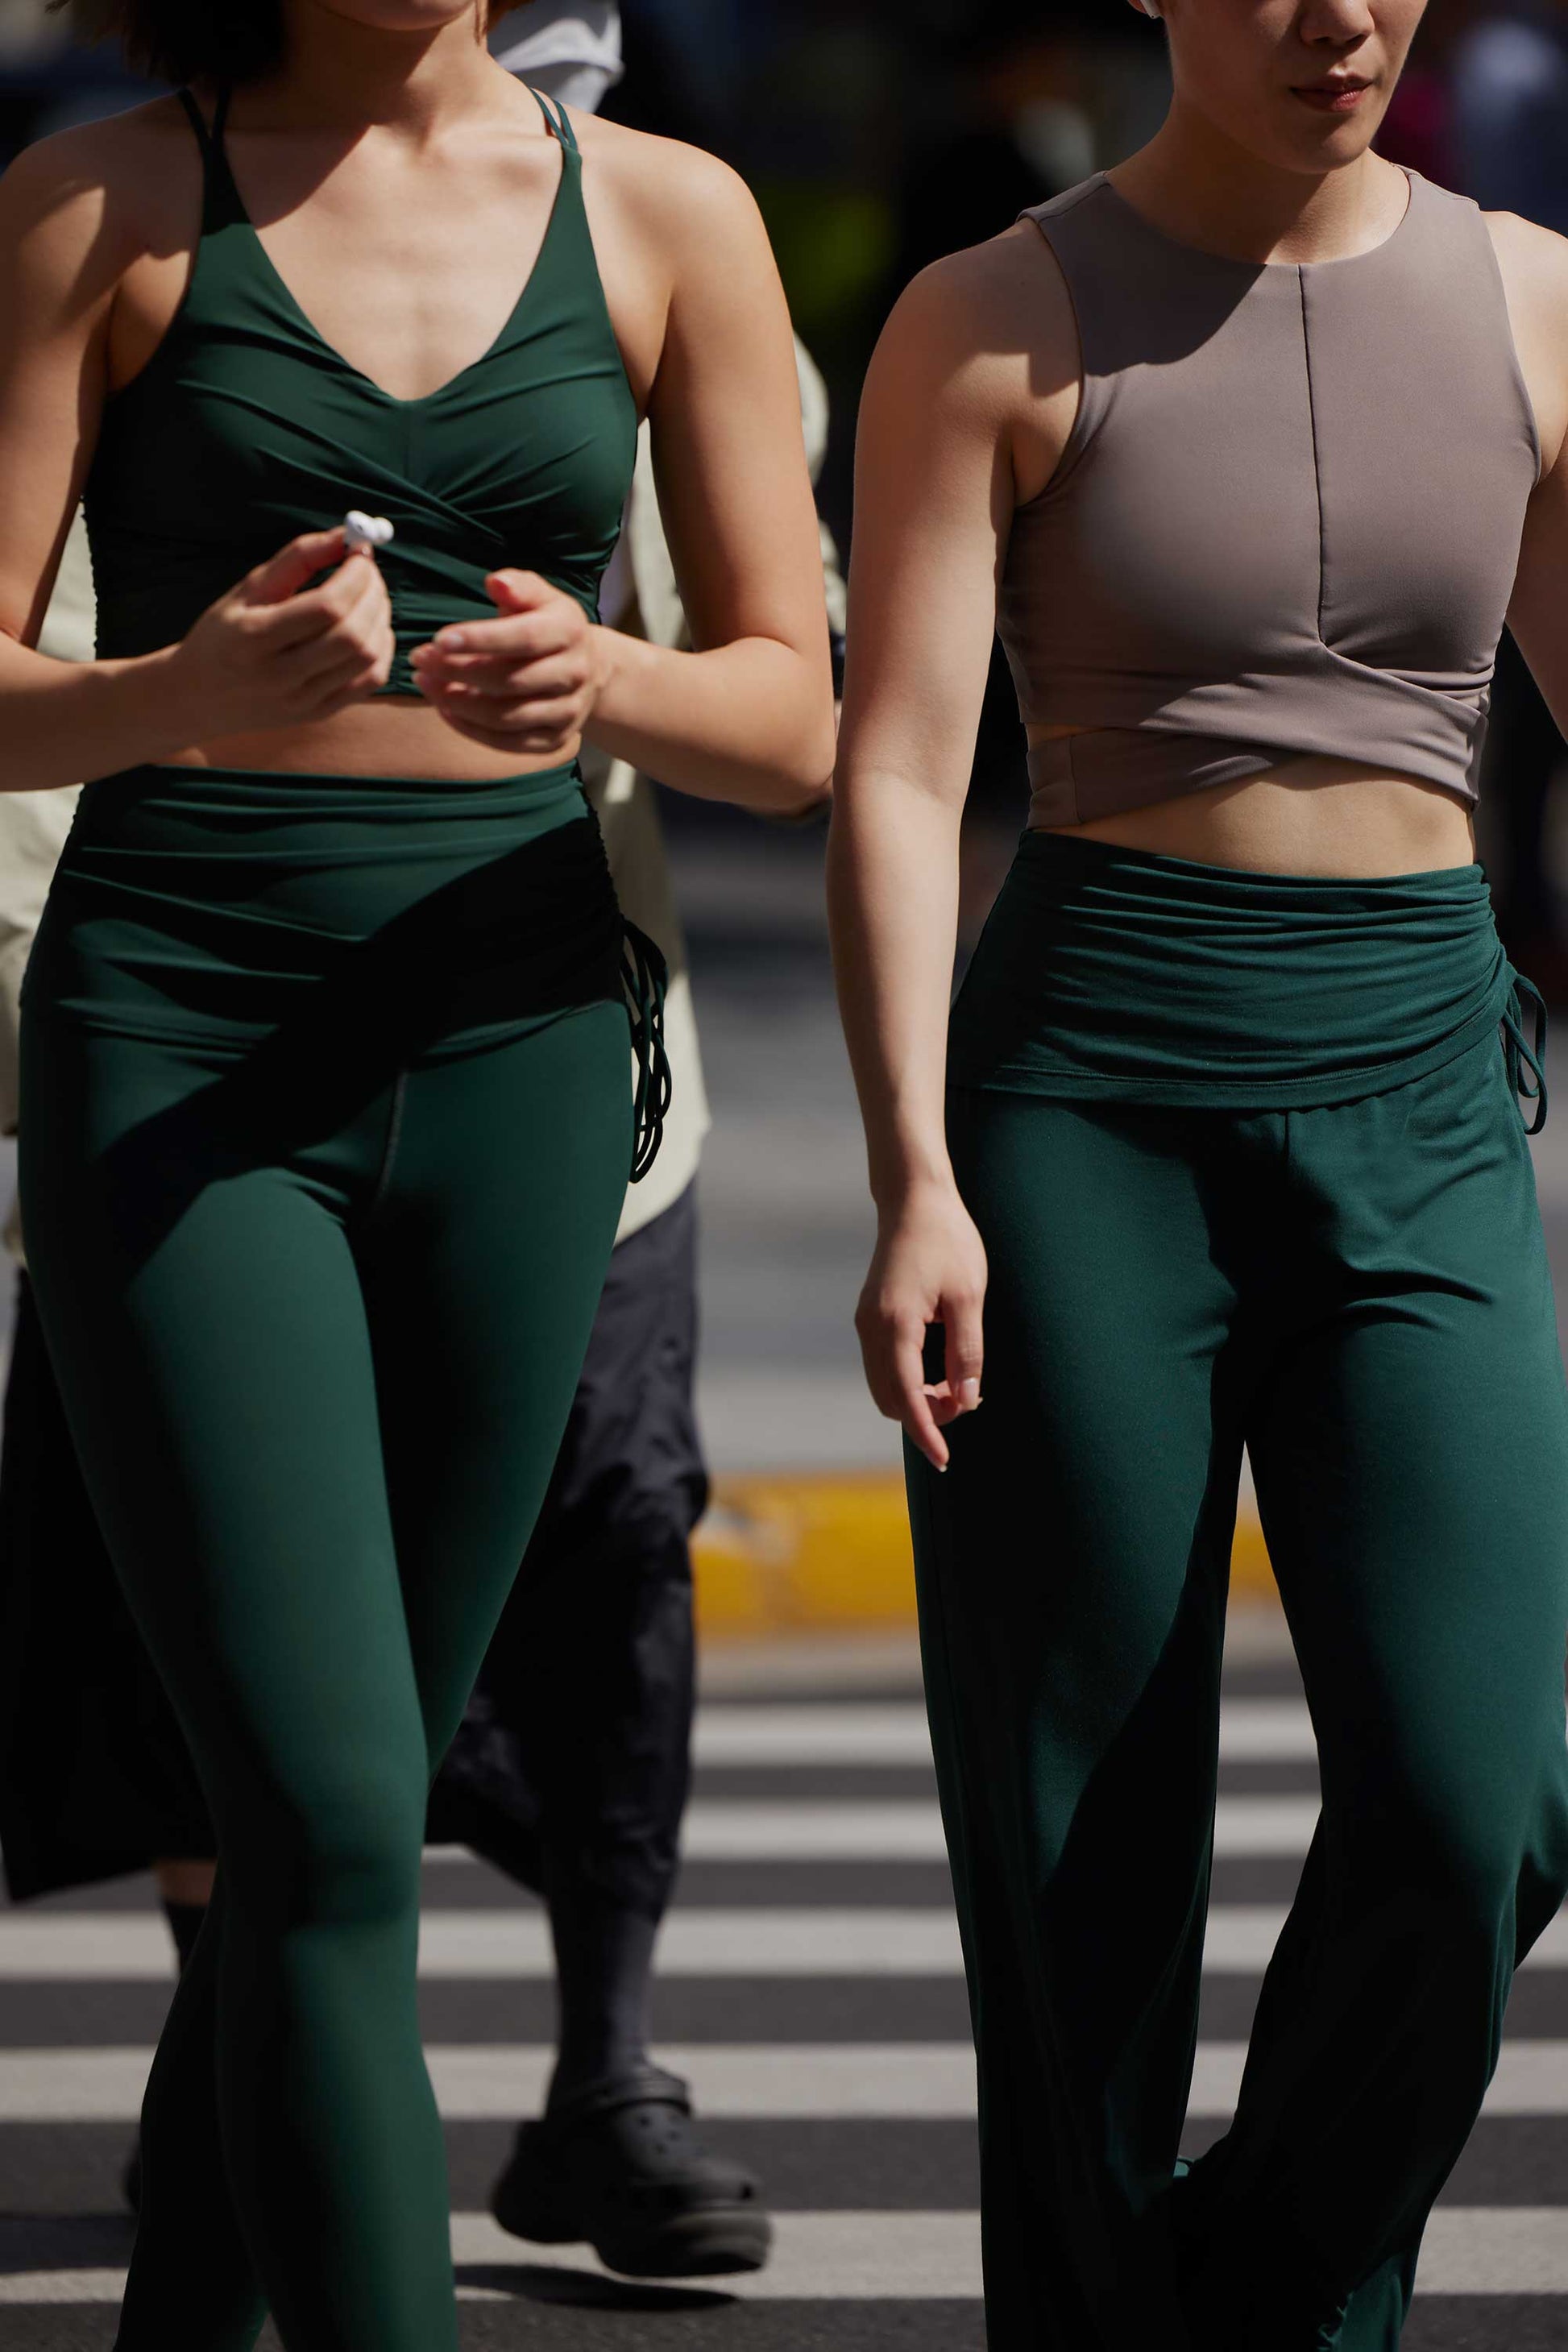 two women in the picture. the left woman wearing a green sports bra  and a green drawstring leggings. the right woman wearing taupe sports bra and green drawstring pants.